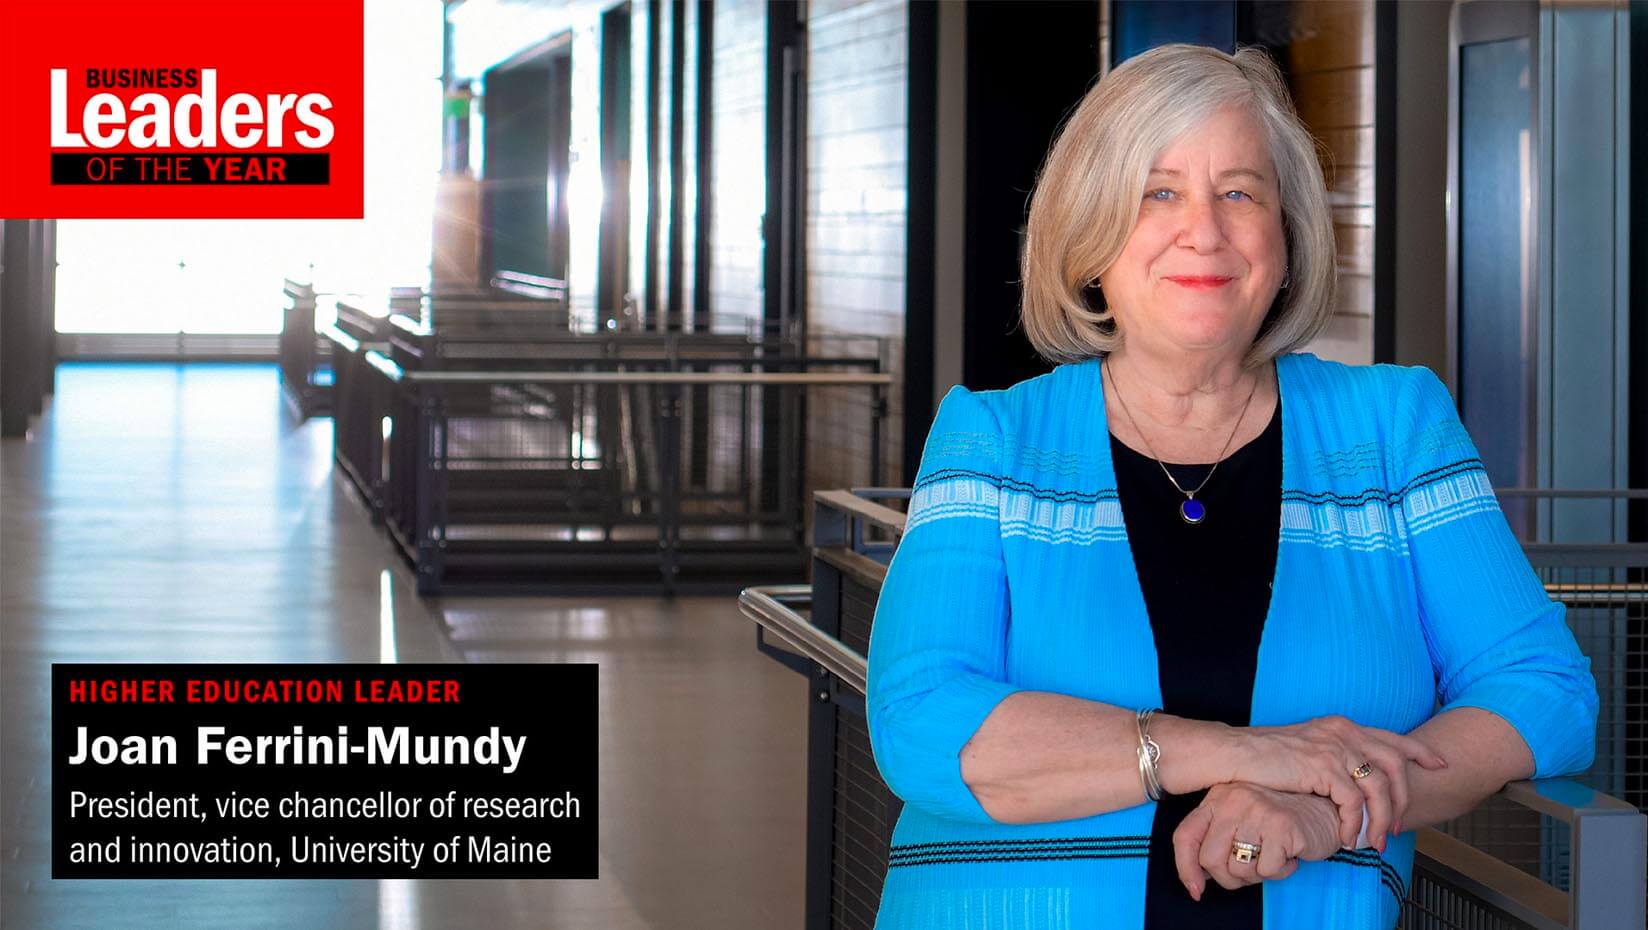 featured image for Ferrini-Mundy named Business Leader of the Year by Mainebiz for fostering STEM education